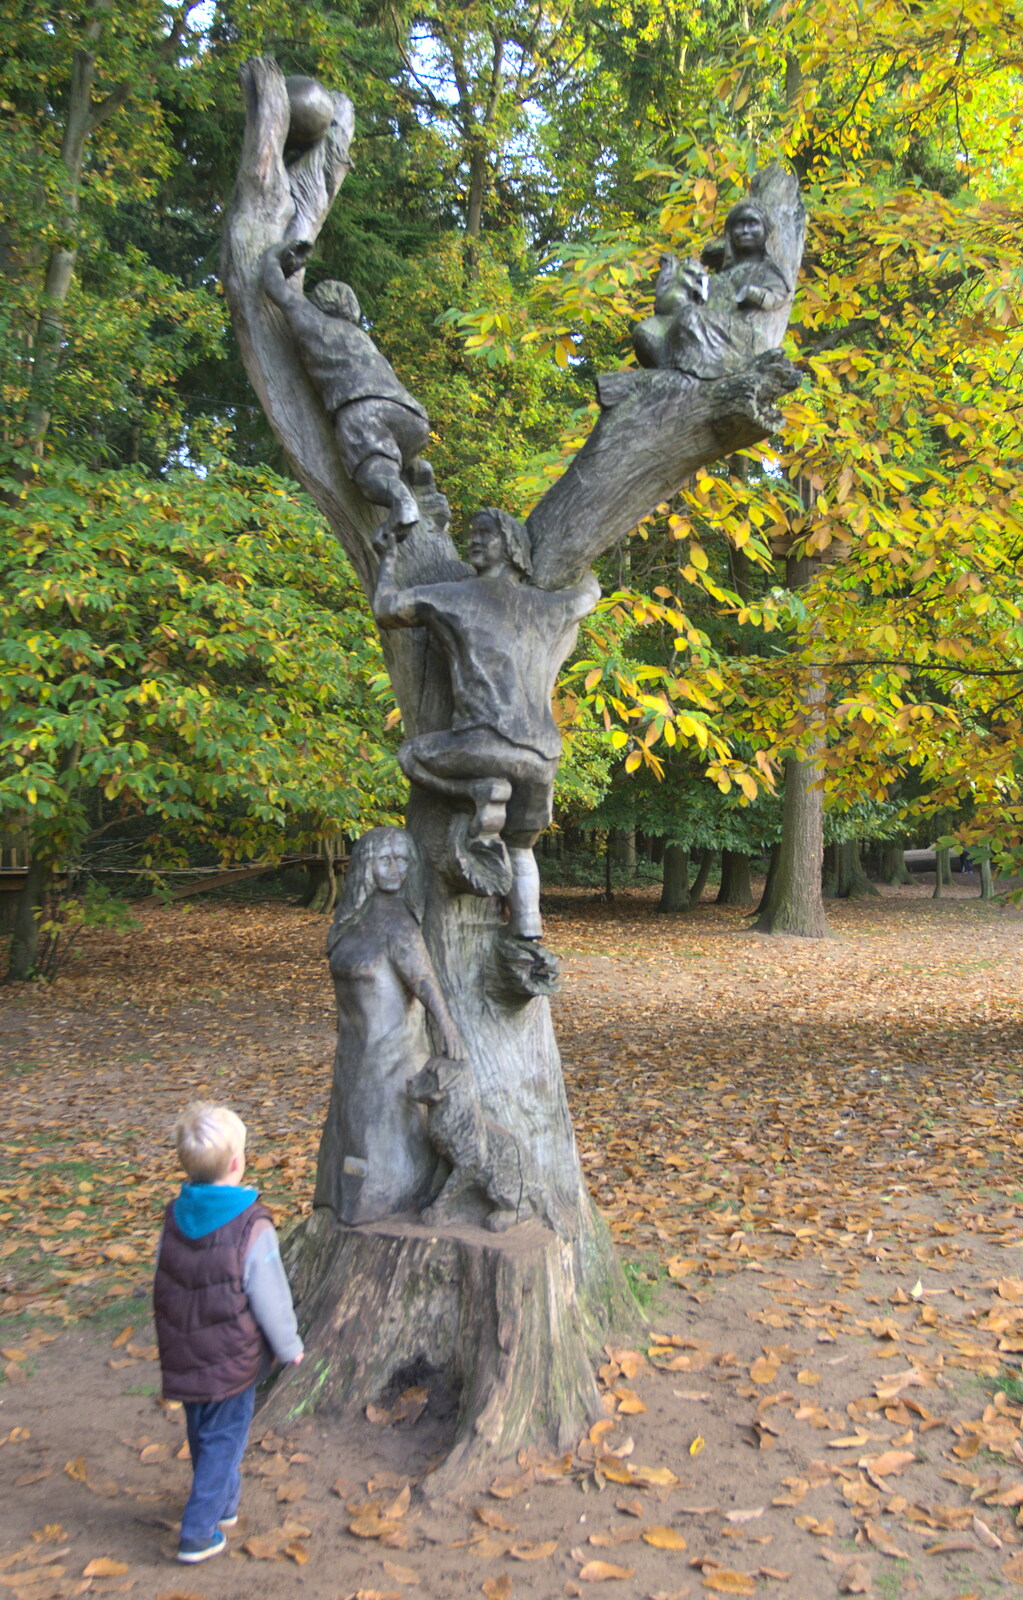 Harry considers a tree sculpture from A Day at High Lodge, Brandon Forest, Suffolk - 26th October 2015